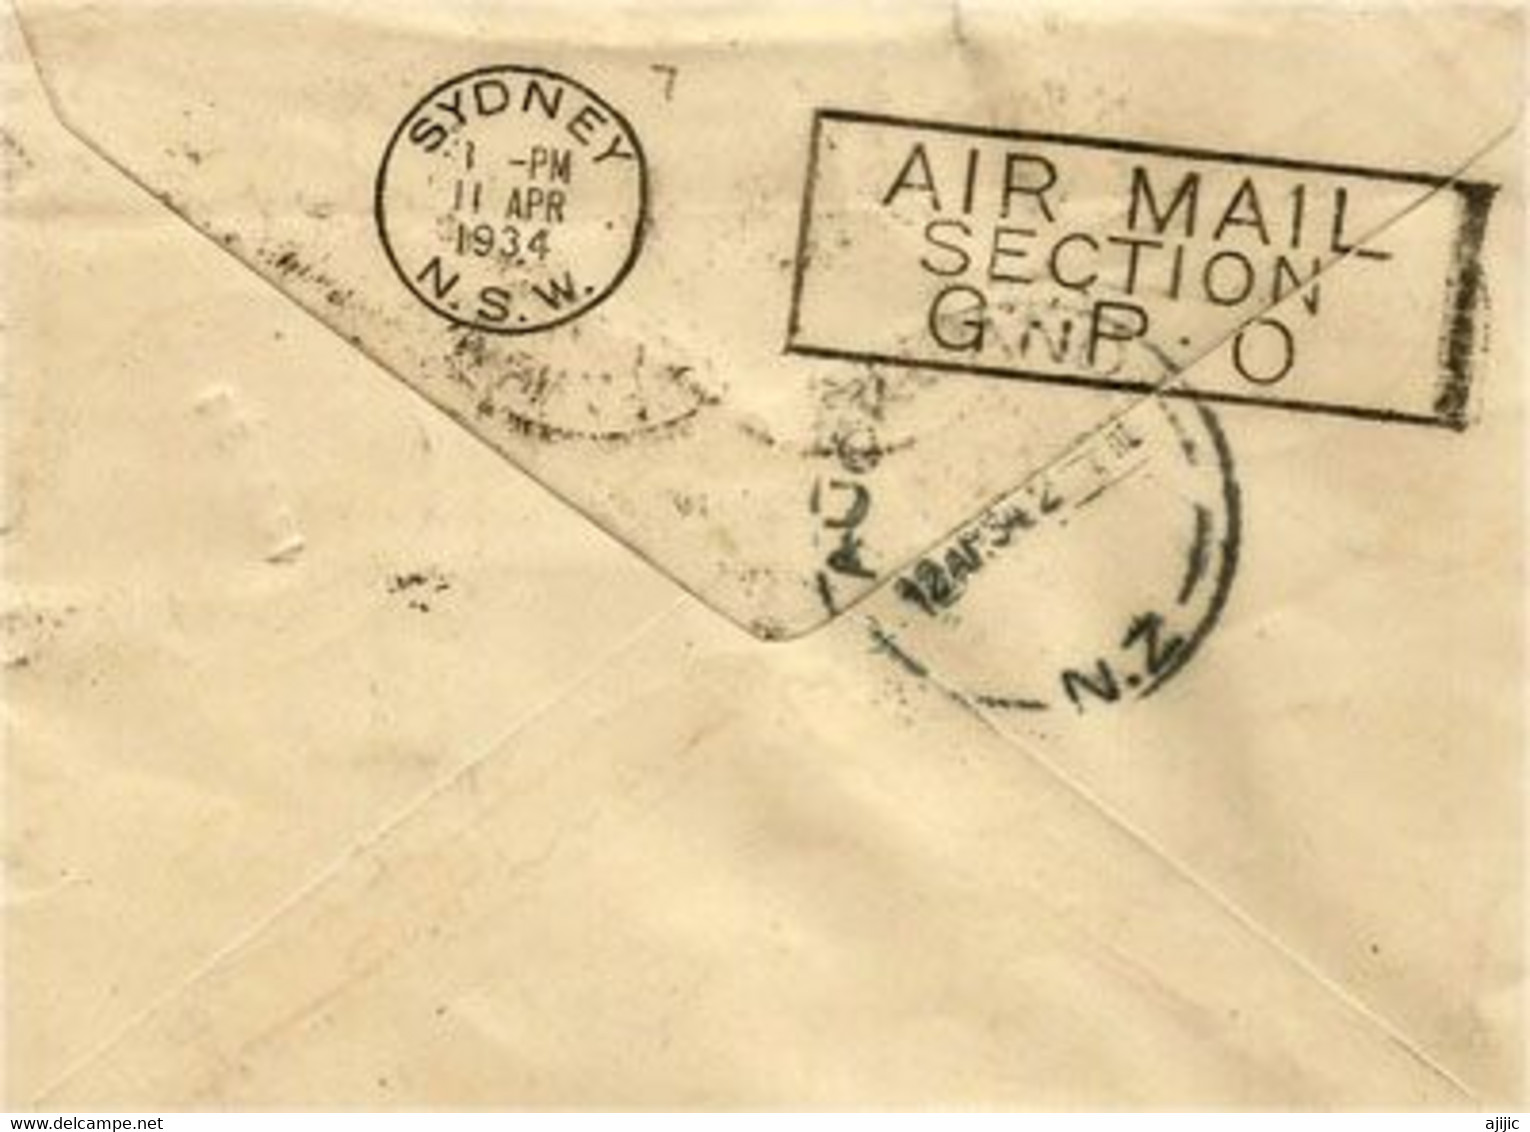 FIRST OFFICIAL AIR MAIL NEW-ZEALAND To AUSTRALIA 10 APRIL 1934. KAITAIA (N-Z)  To SYDNEY  (RARE-SCARCE) - Covers & Documents